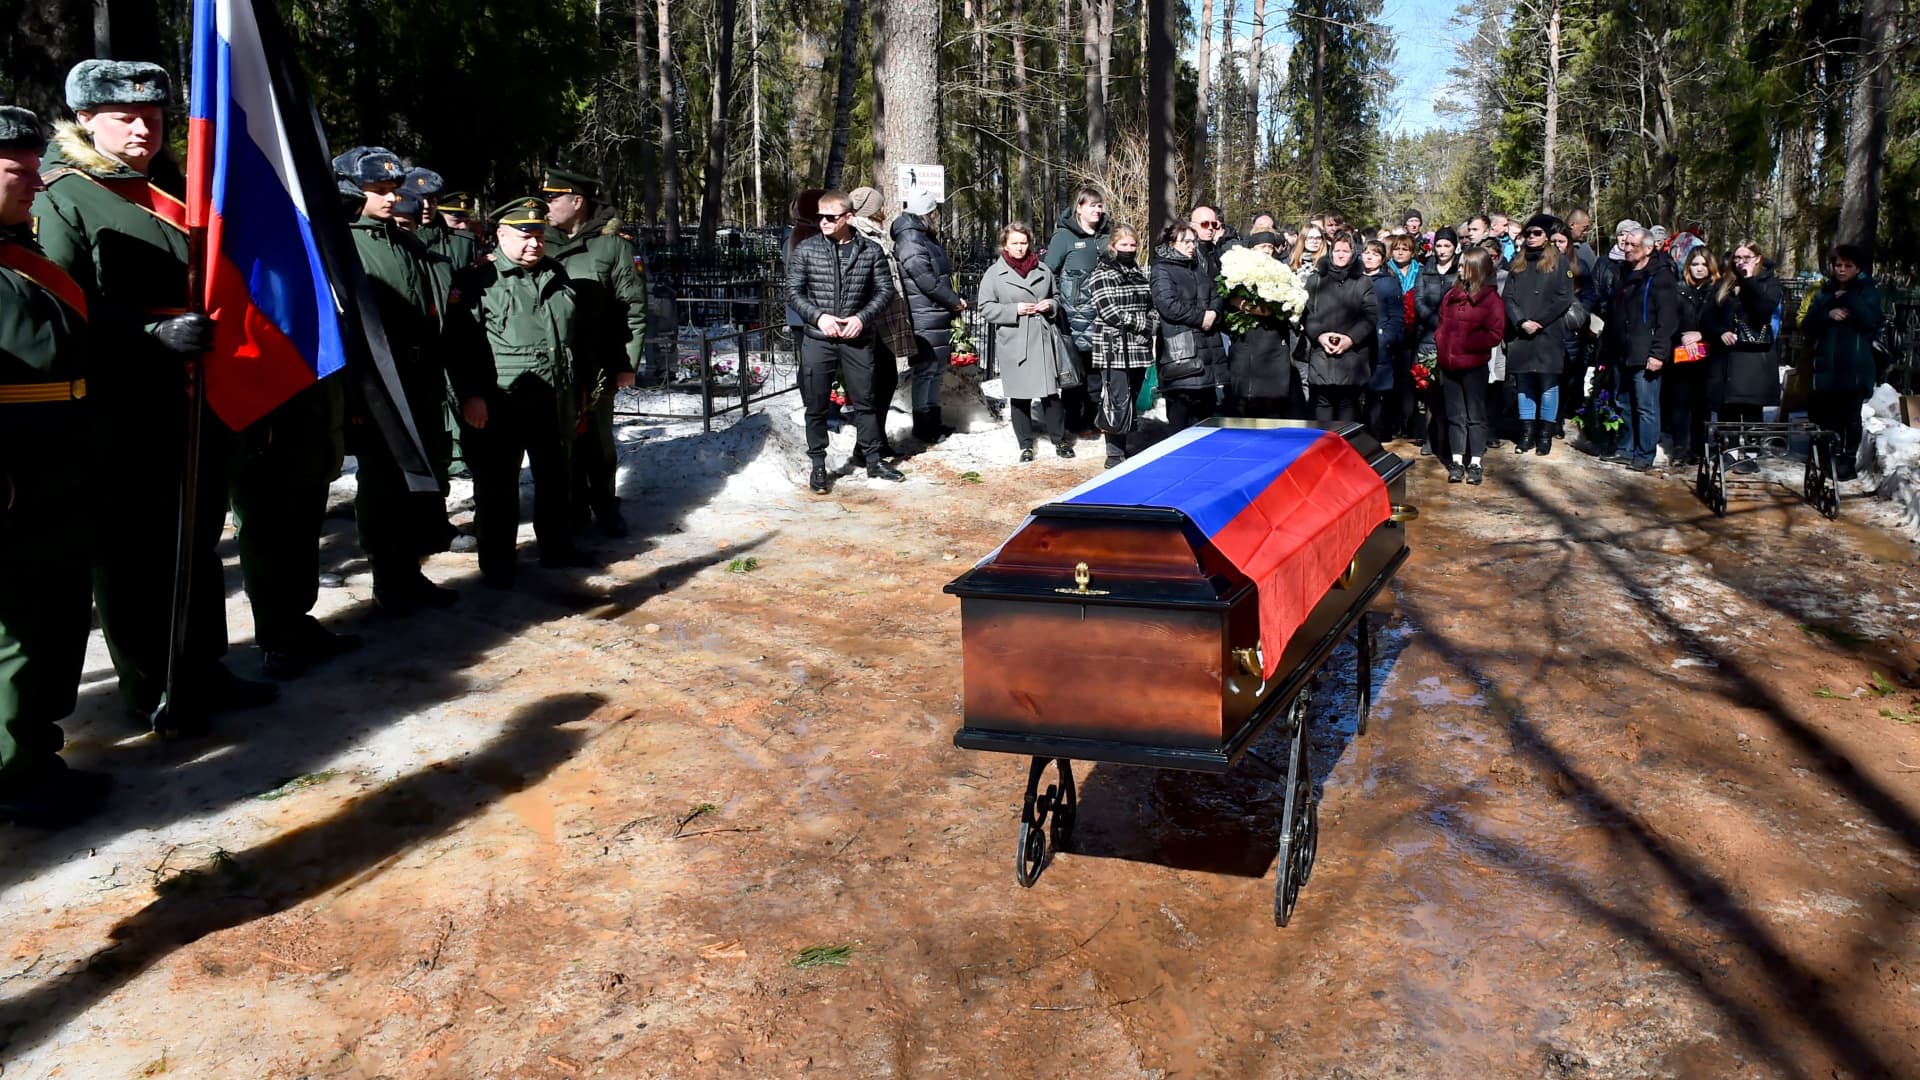 Family members and mourners gather during the funeral of 20-year-old Russian serviceman Nikita Avrov, at a church in Luga some 150kms south of Saint Petersburg on April 11, 2022, after his death on March 27, during the ongoing Russian invasion of Ukraine.